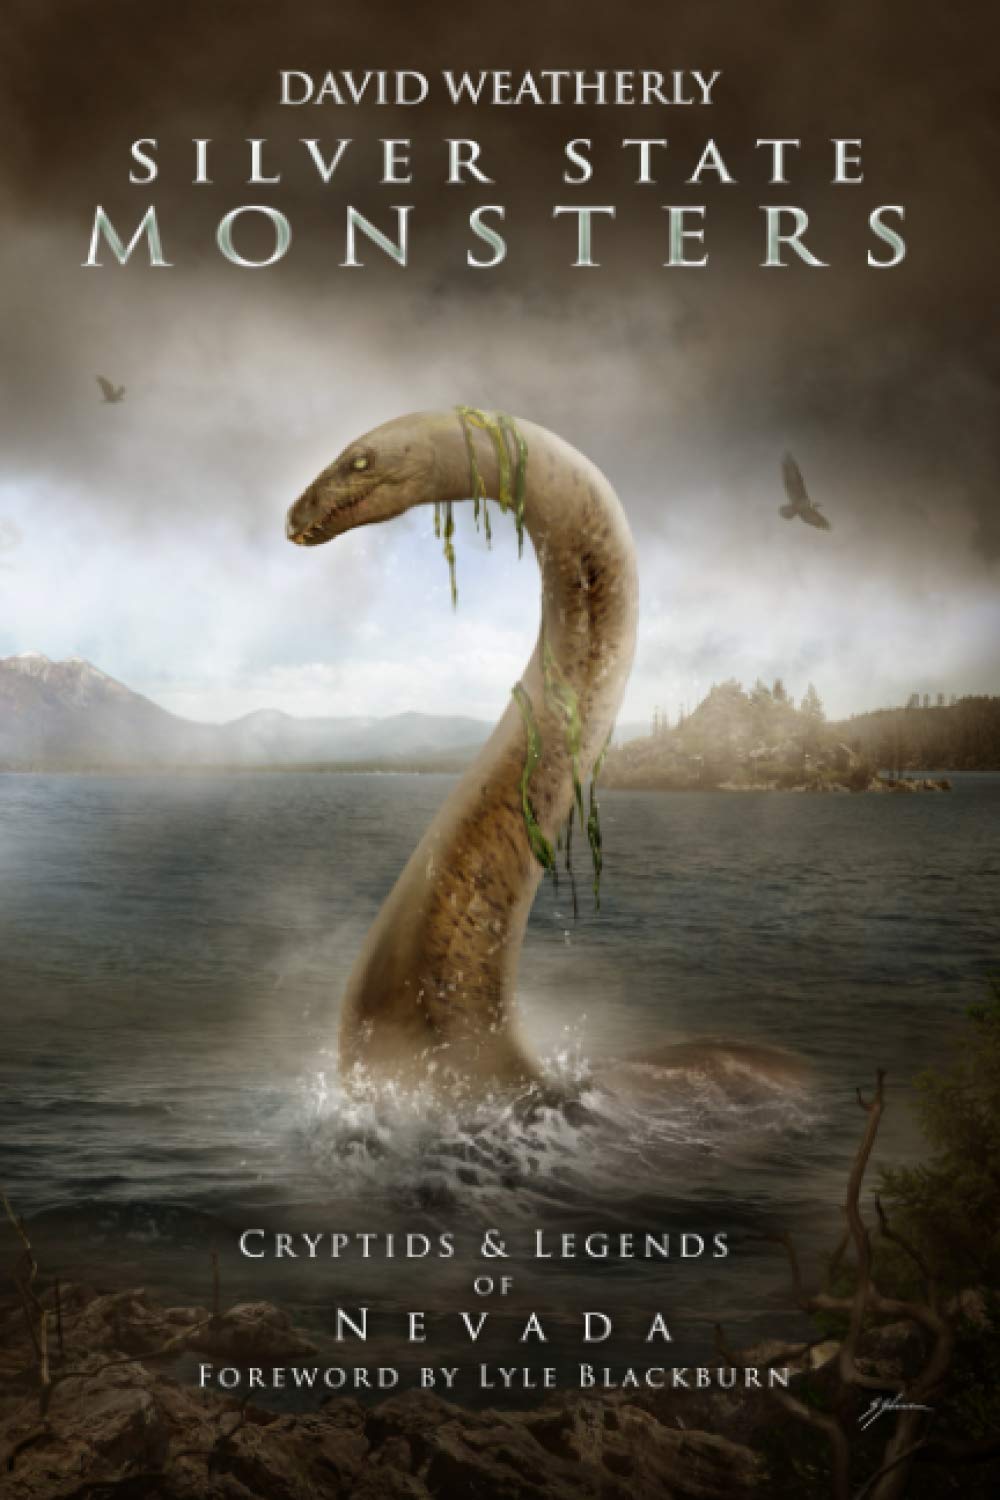 Silver State Monsters: Cryptids & Legends of Nevada by David Weatherly, Lyle Blackburn